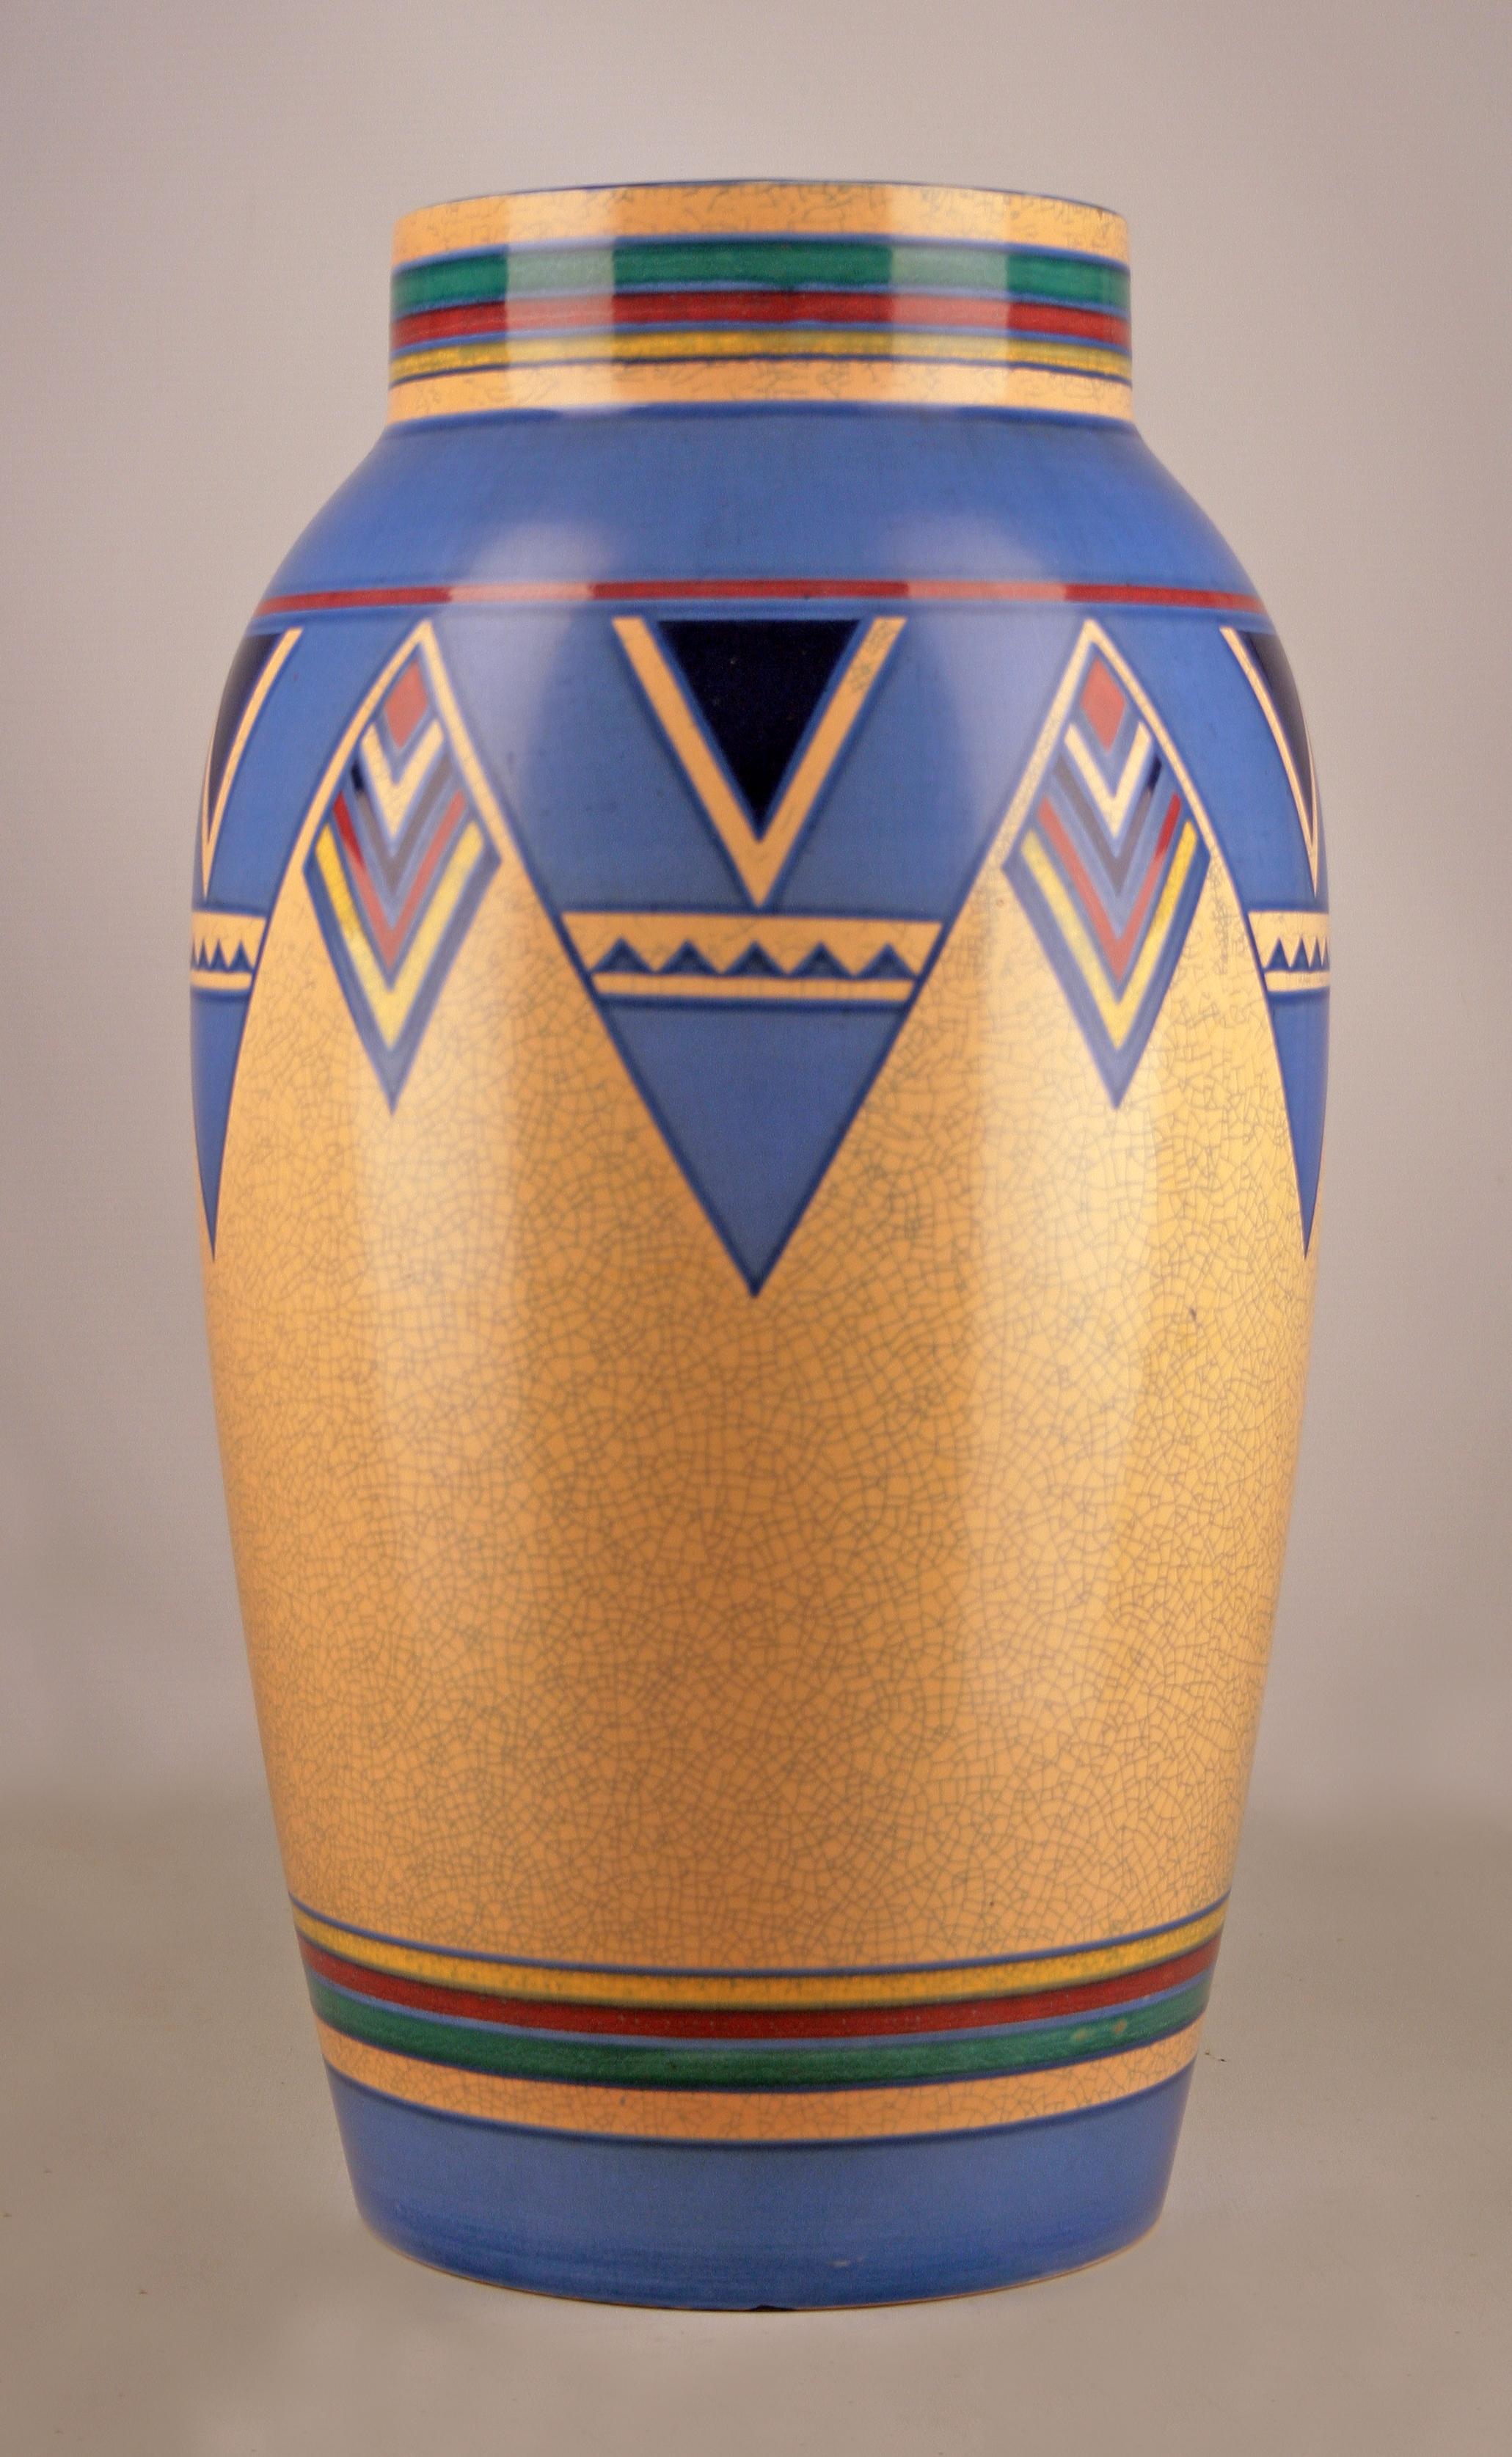 Mid-20th century Modern post-war glazed and painted ceramic vase from West Germany

By: unknown
Material: ceramic, paint
Technique: glazed, painted, pressed, molded, hand-painted
Dimensions: 10 in x 19 in
Date: mid-20th century, post-war, circa